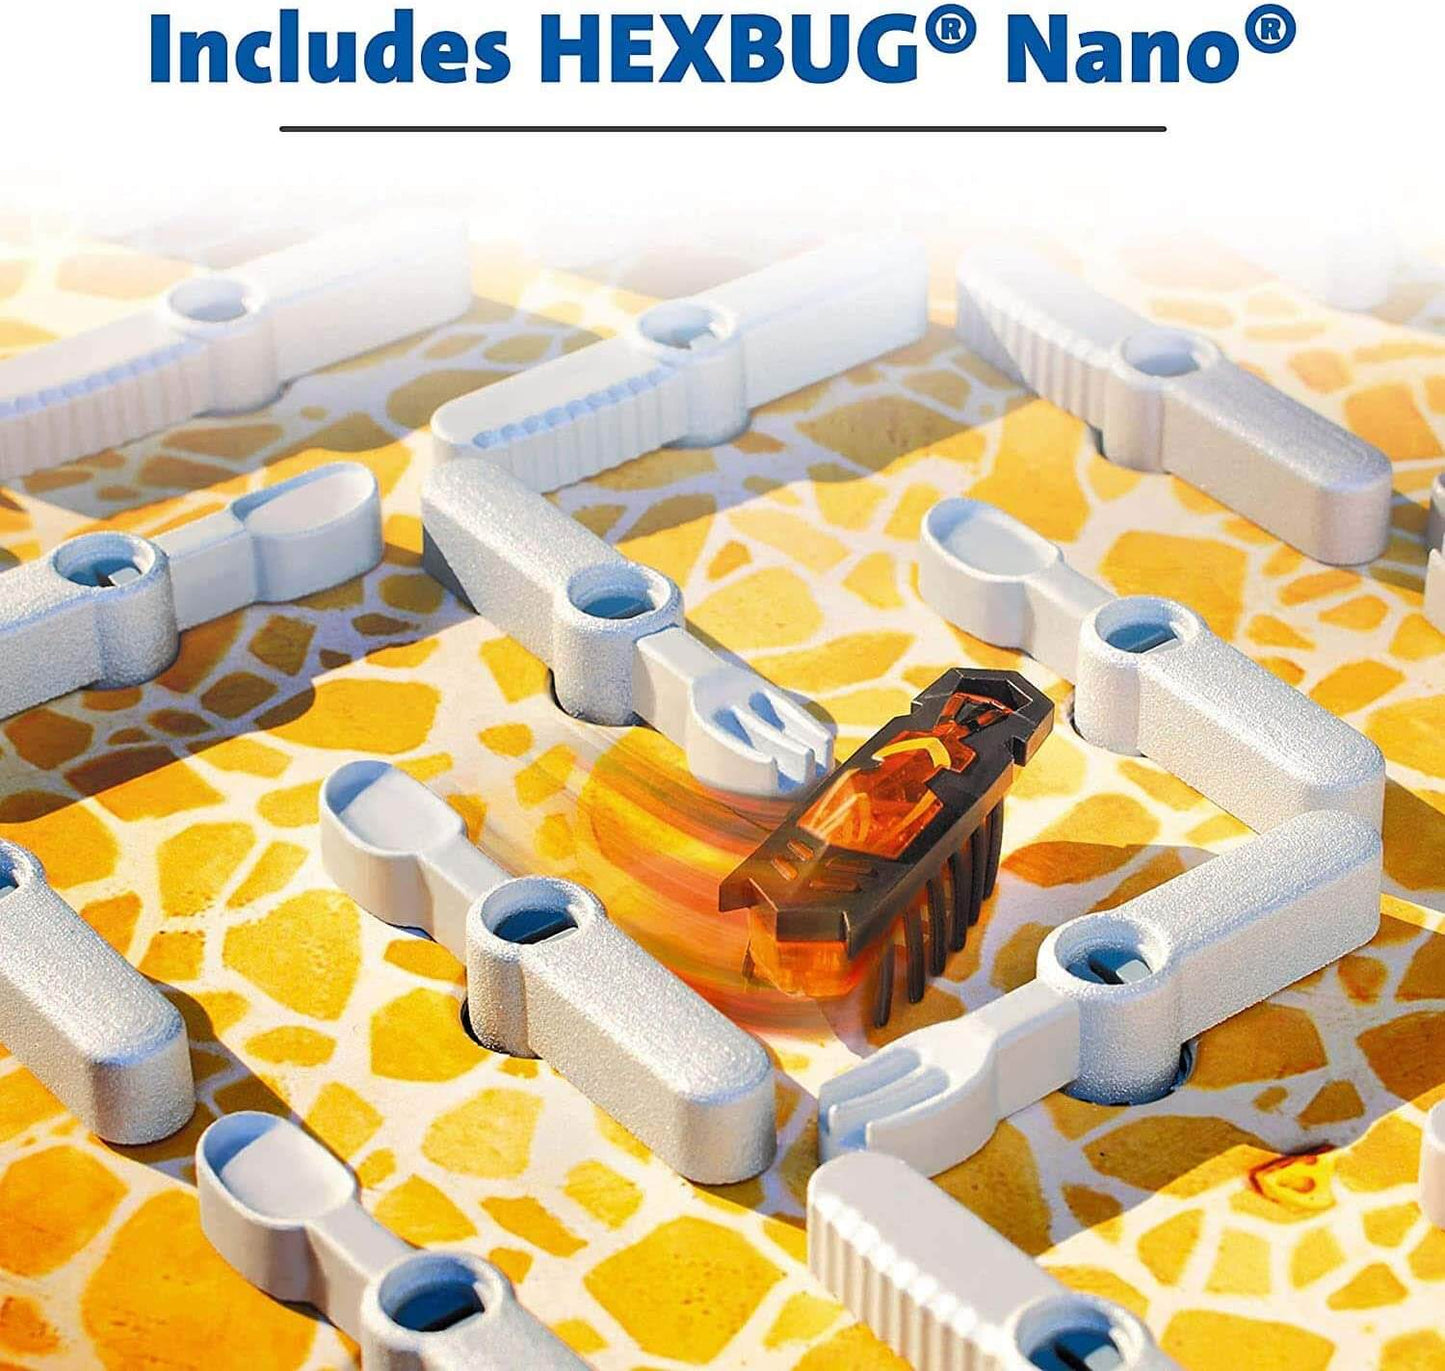 Bugs In The Kitchen - Catch the Hexbug Game